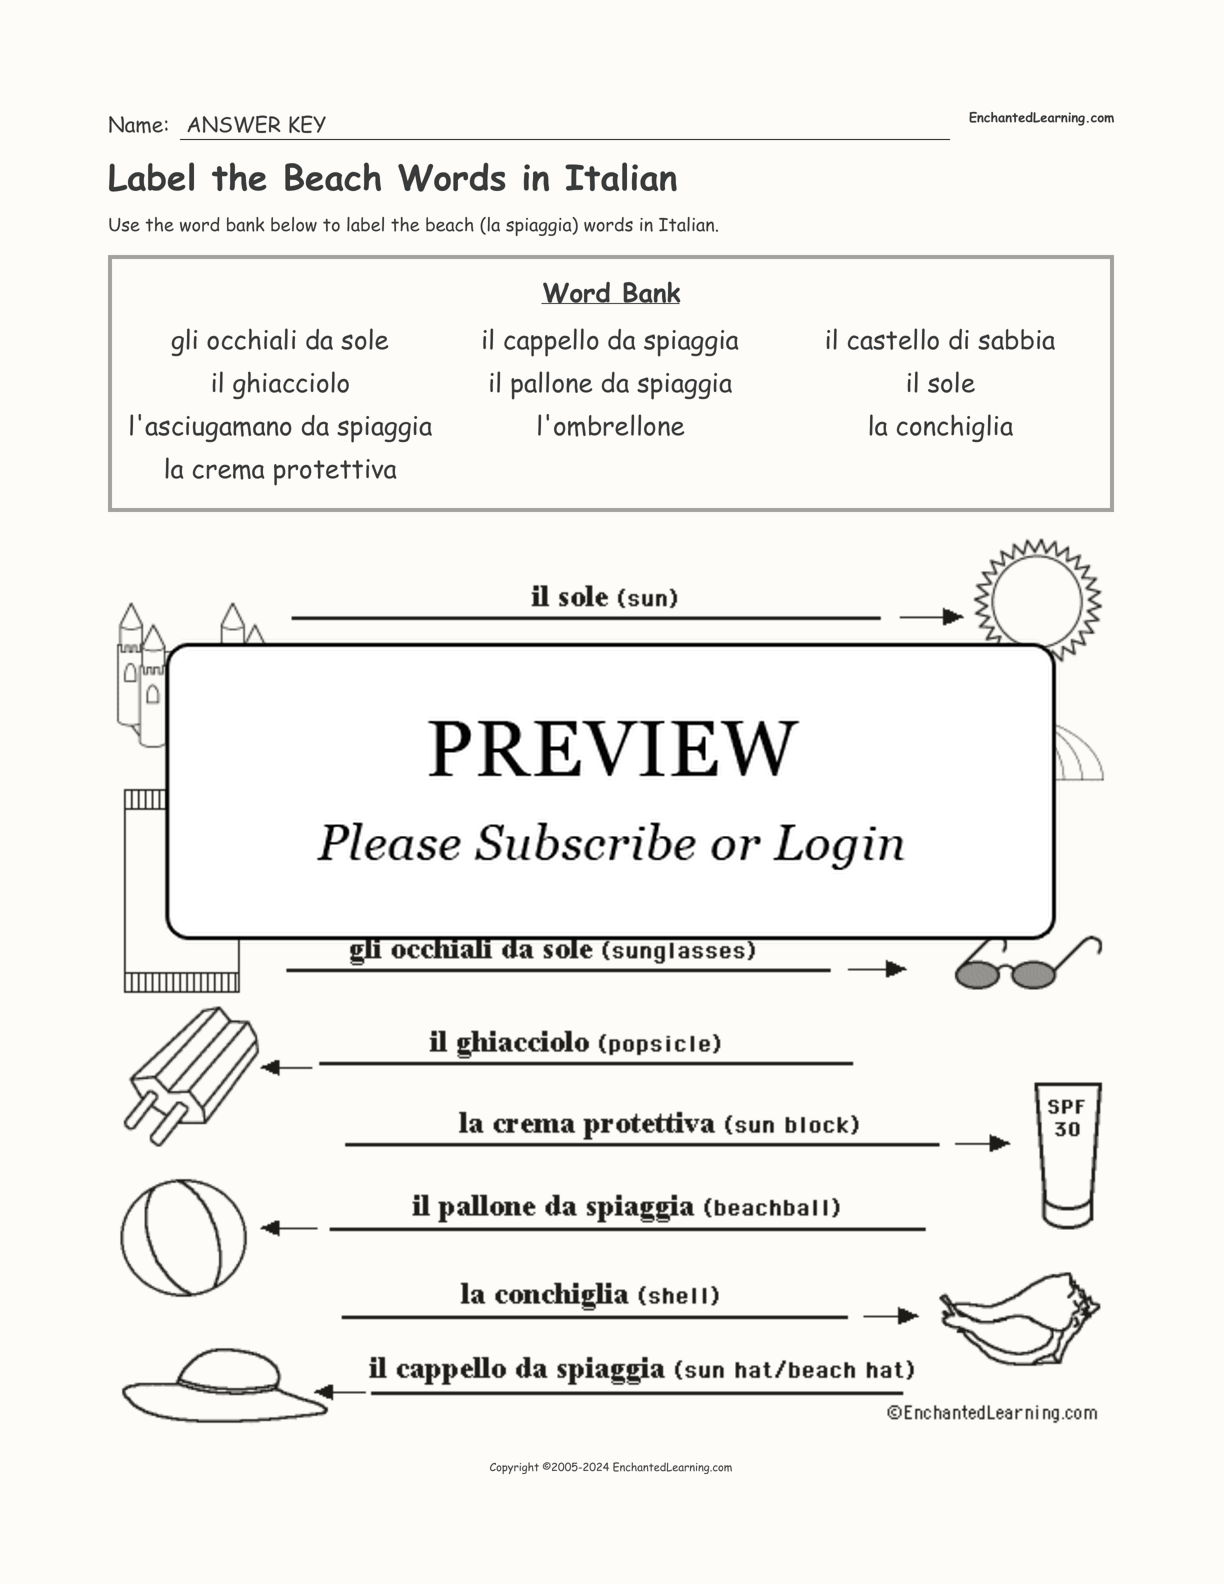 Label the Beach Words in Italian interactive worksheet page 2